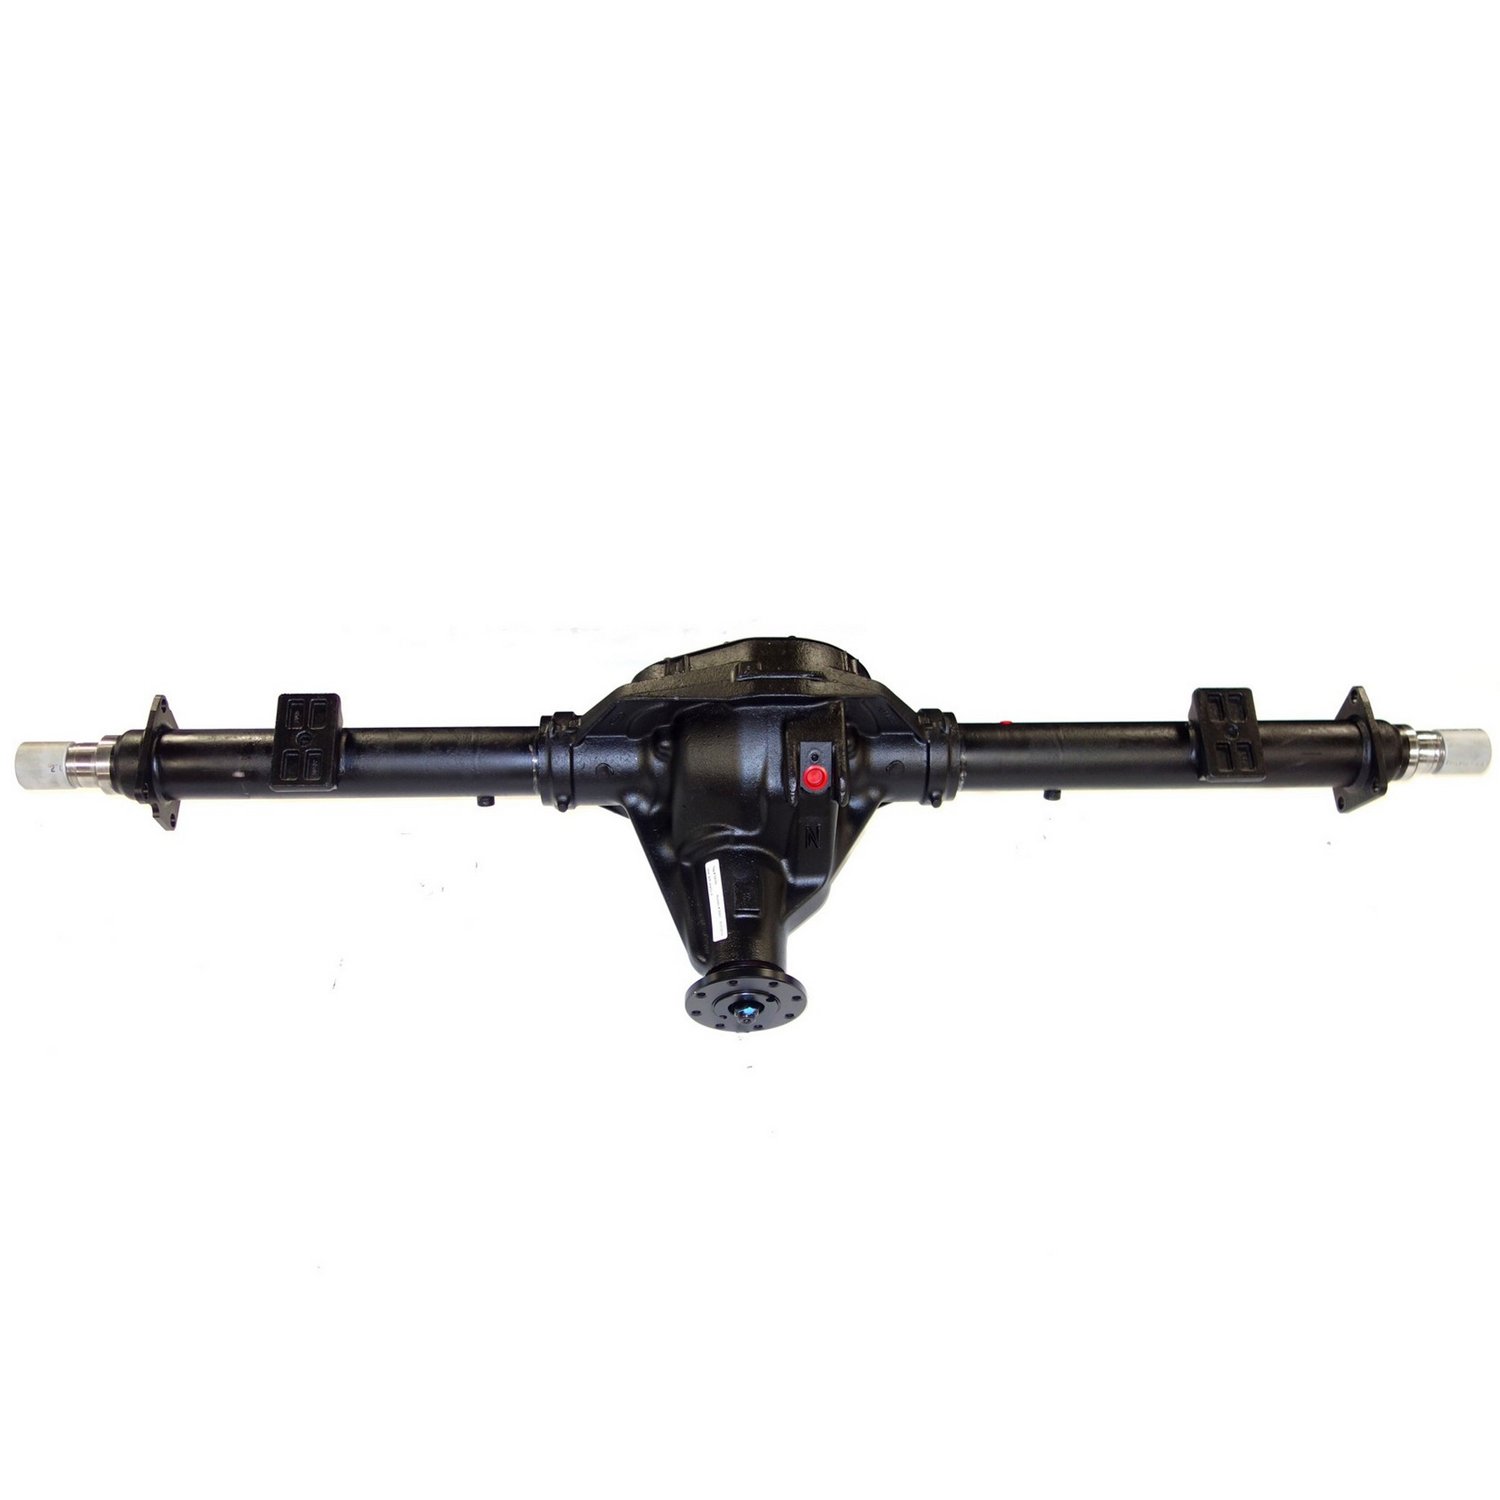 Remanufactured Complete Axle Assy for 10.5" 08-10 F250 & F350, 6.4l, SRW, 3.55 , Posi LSD